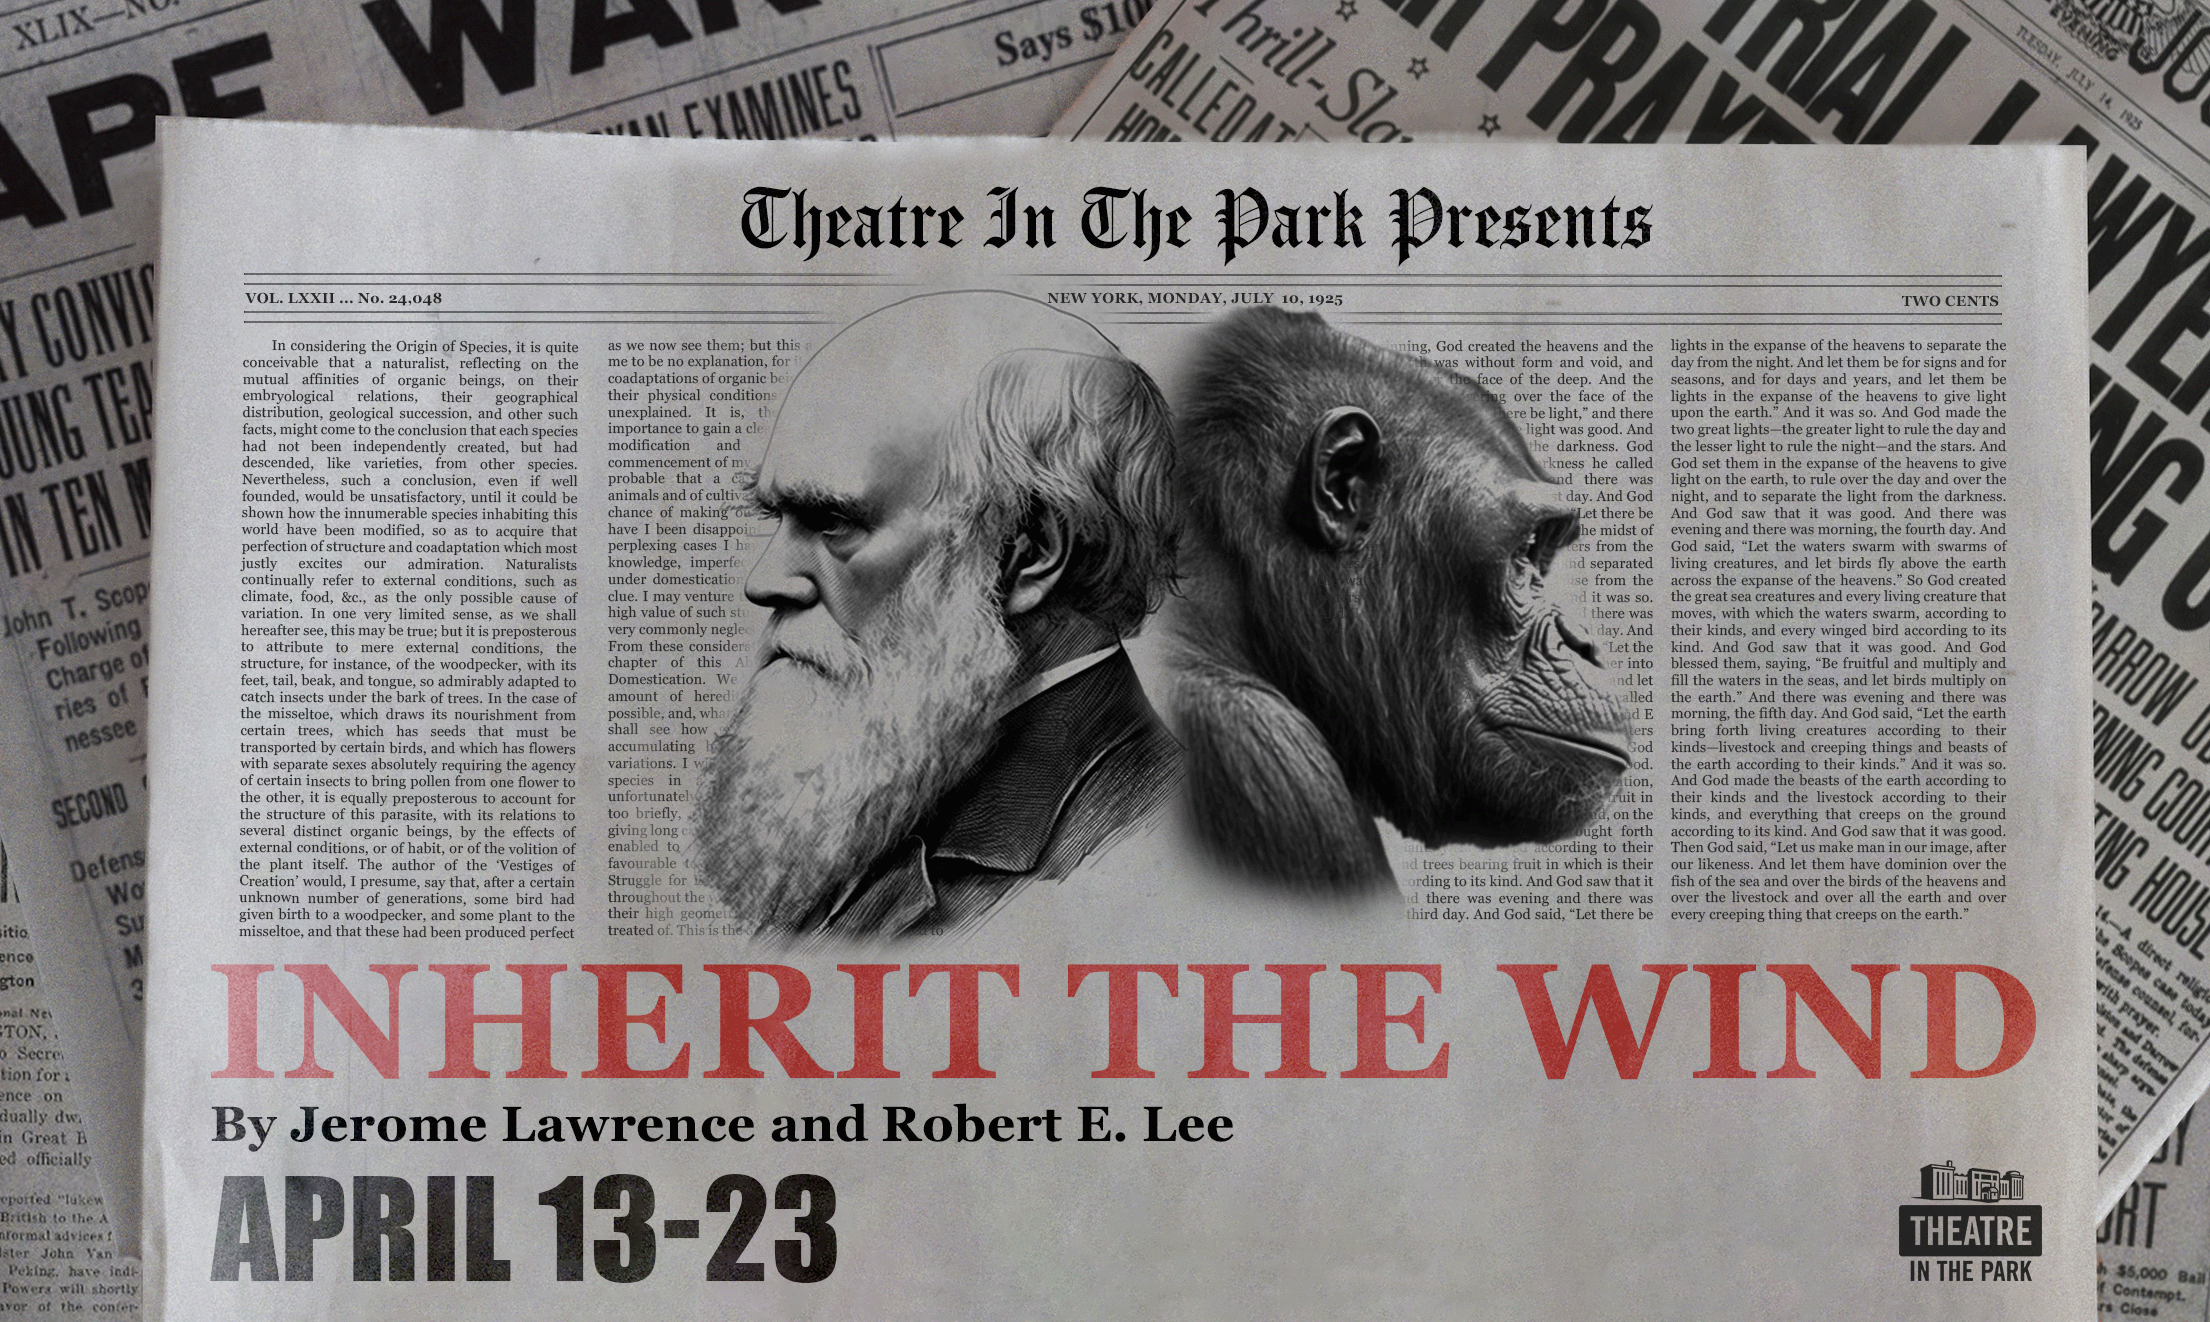 Inherit The Wind by Jerome Lawrence and Robert E. Lee